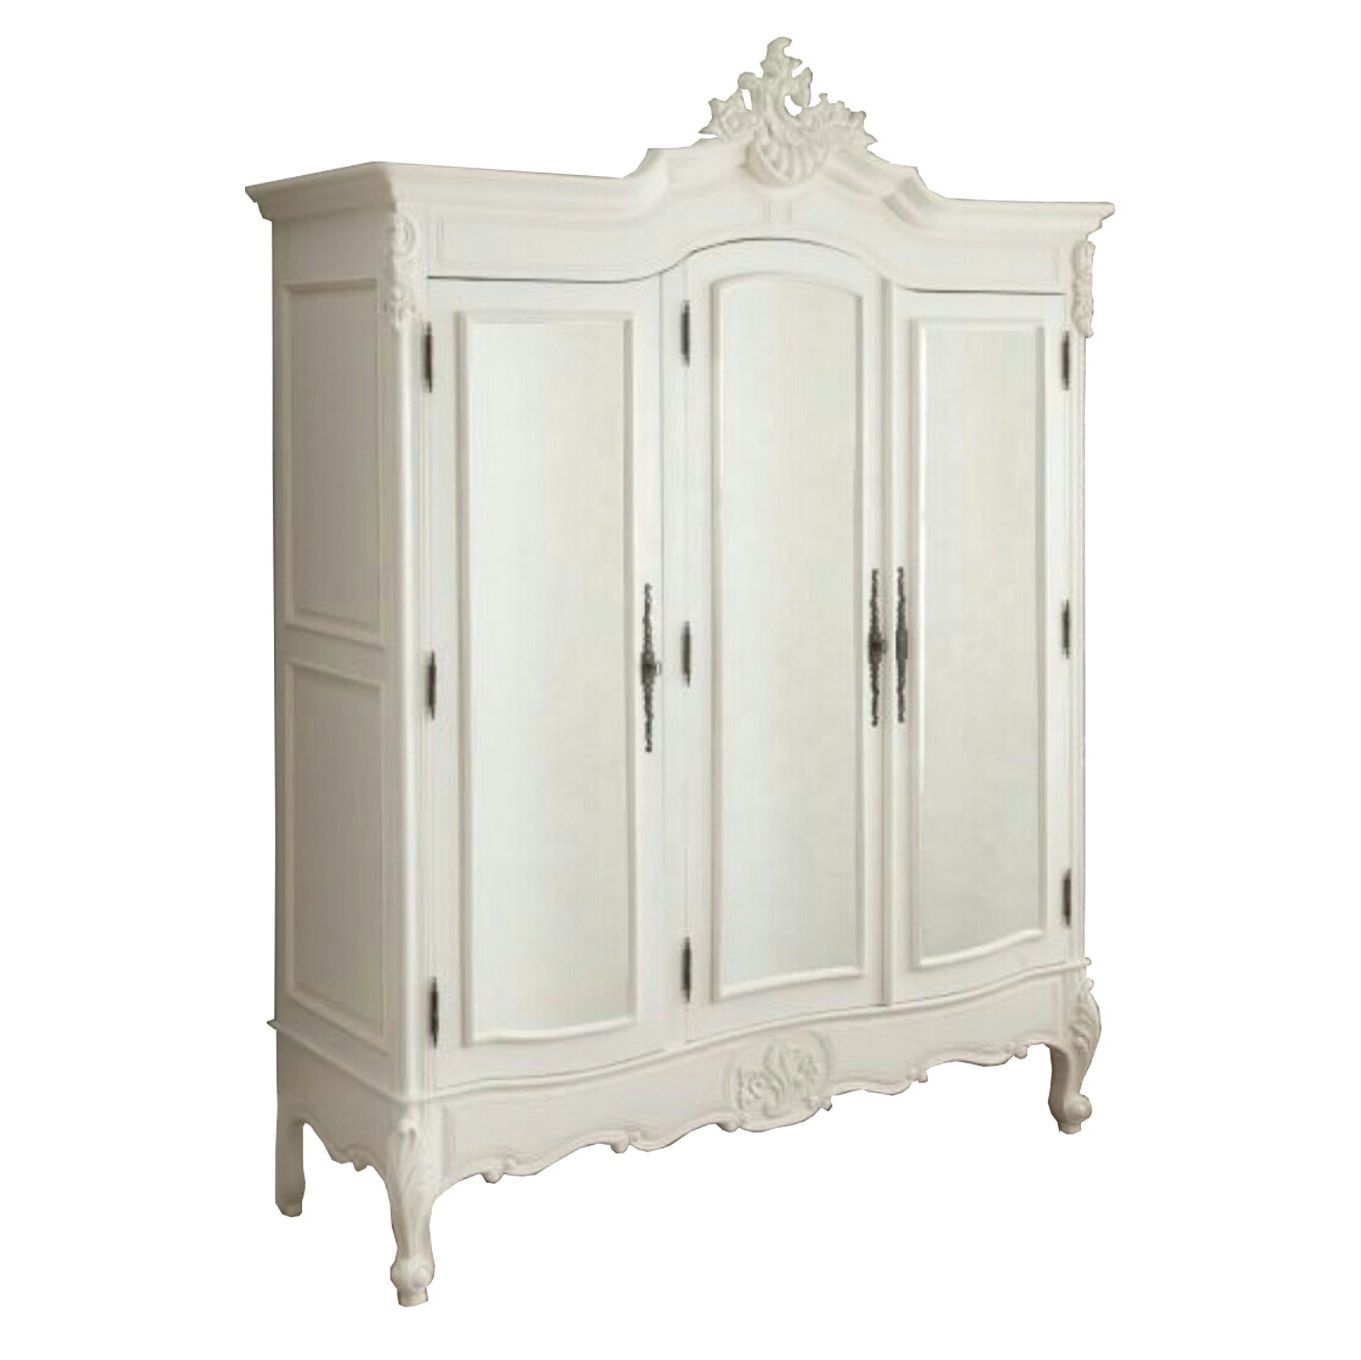 Source Antique Wooden Bedroom French Chateau White Painted 2 Door Double  Armoire Wardrobe On M.alibaba In Shabby Chic White Wardrobes (Gallery 17 of 20)